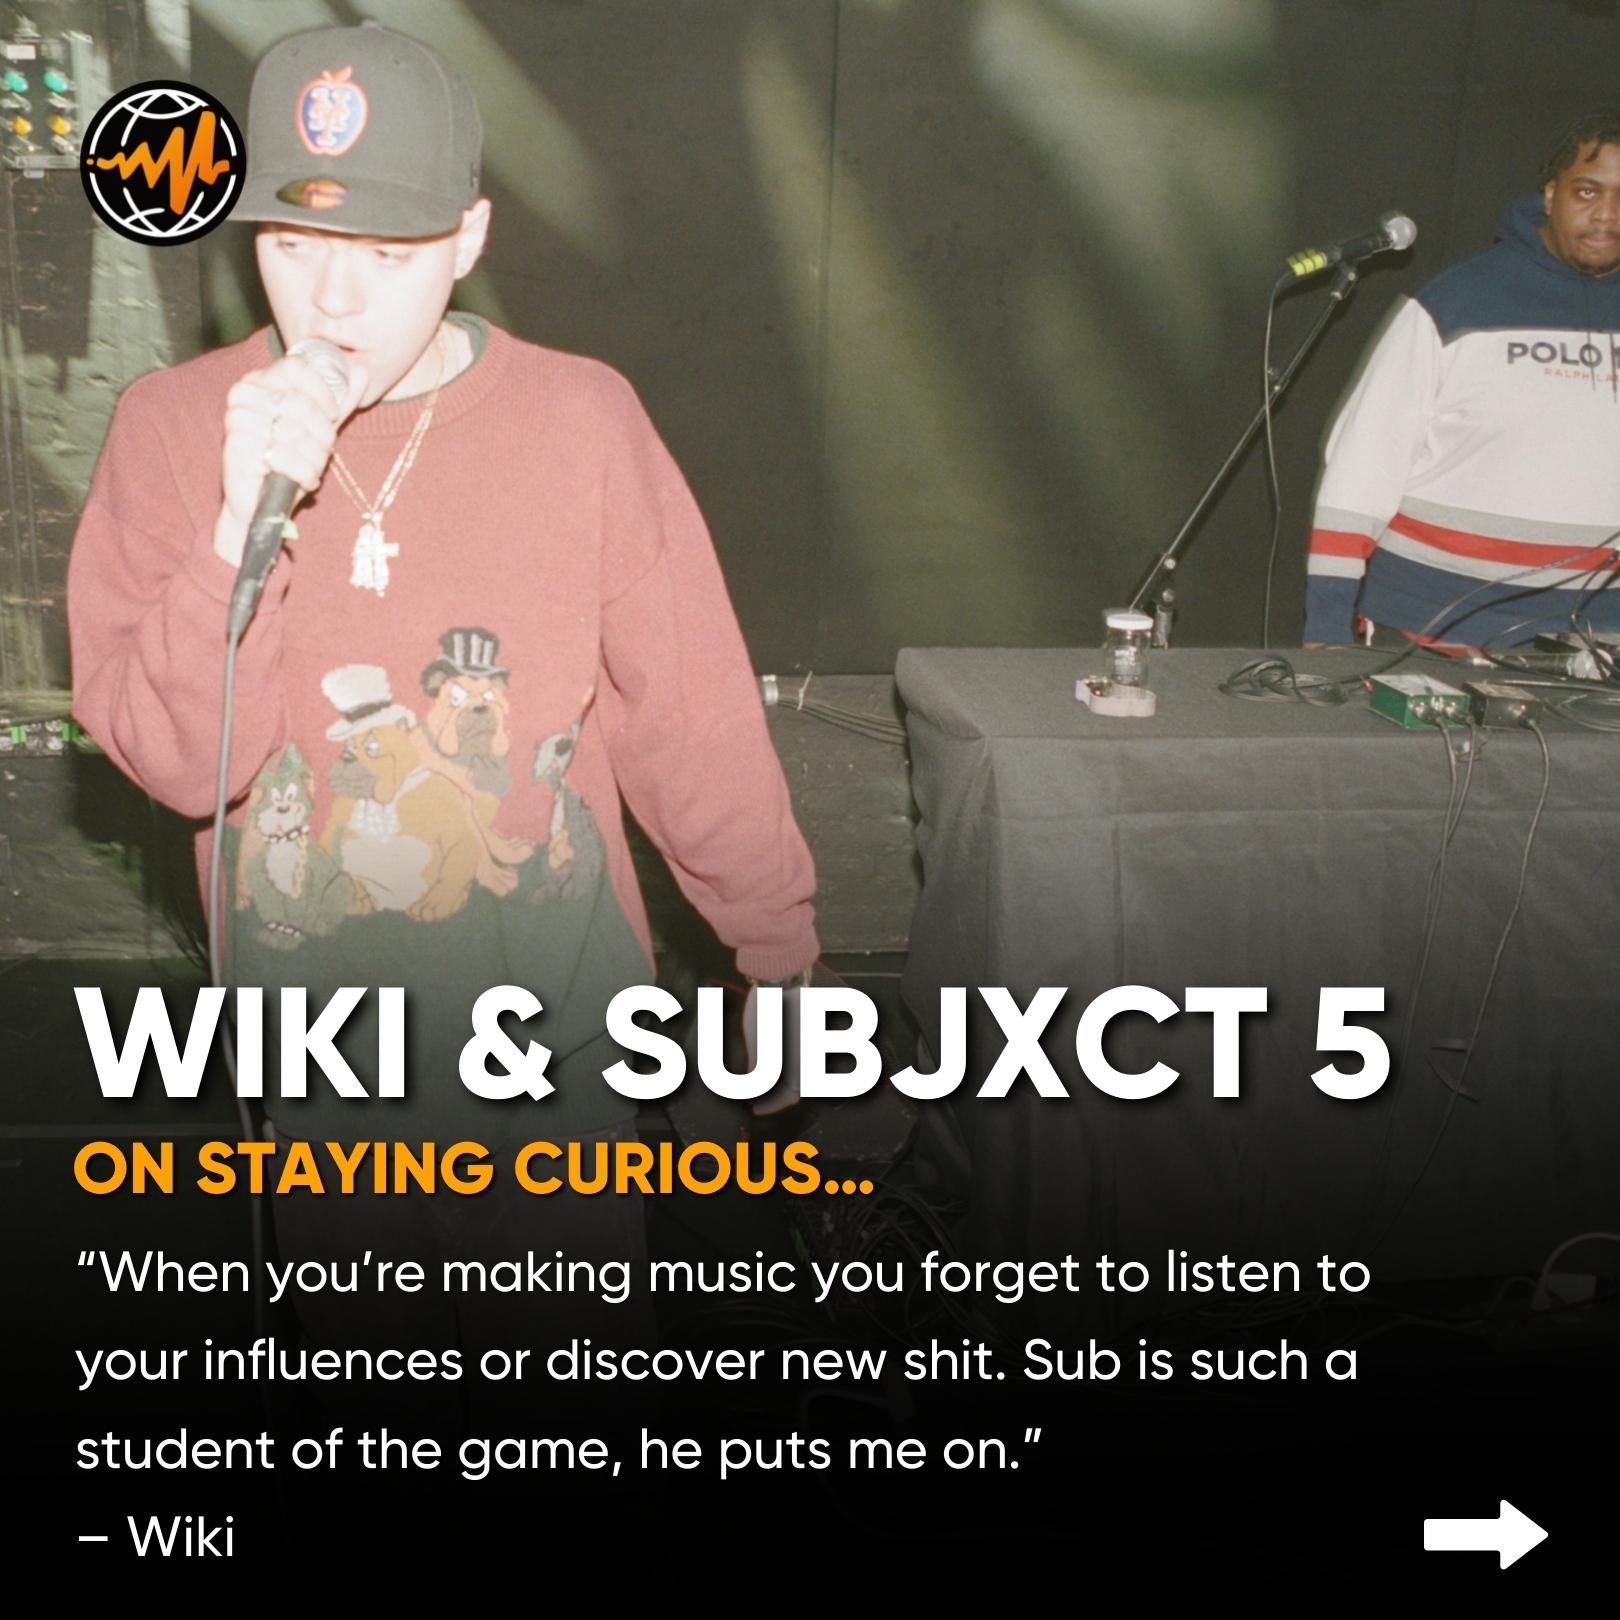 Wiki & Subjxct 5 Made the Next Great NY Rap Tape